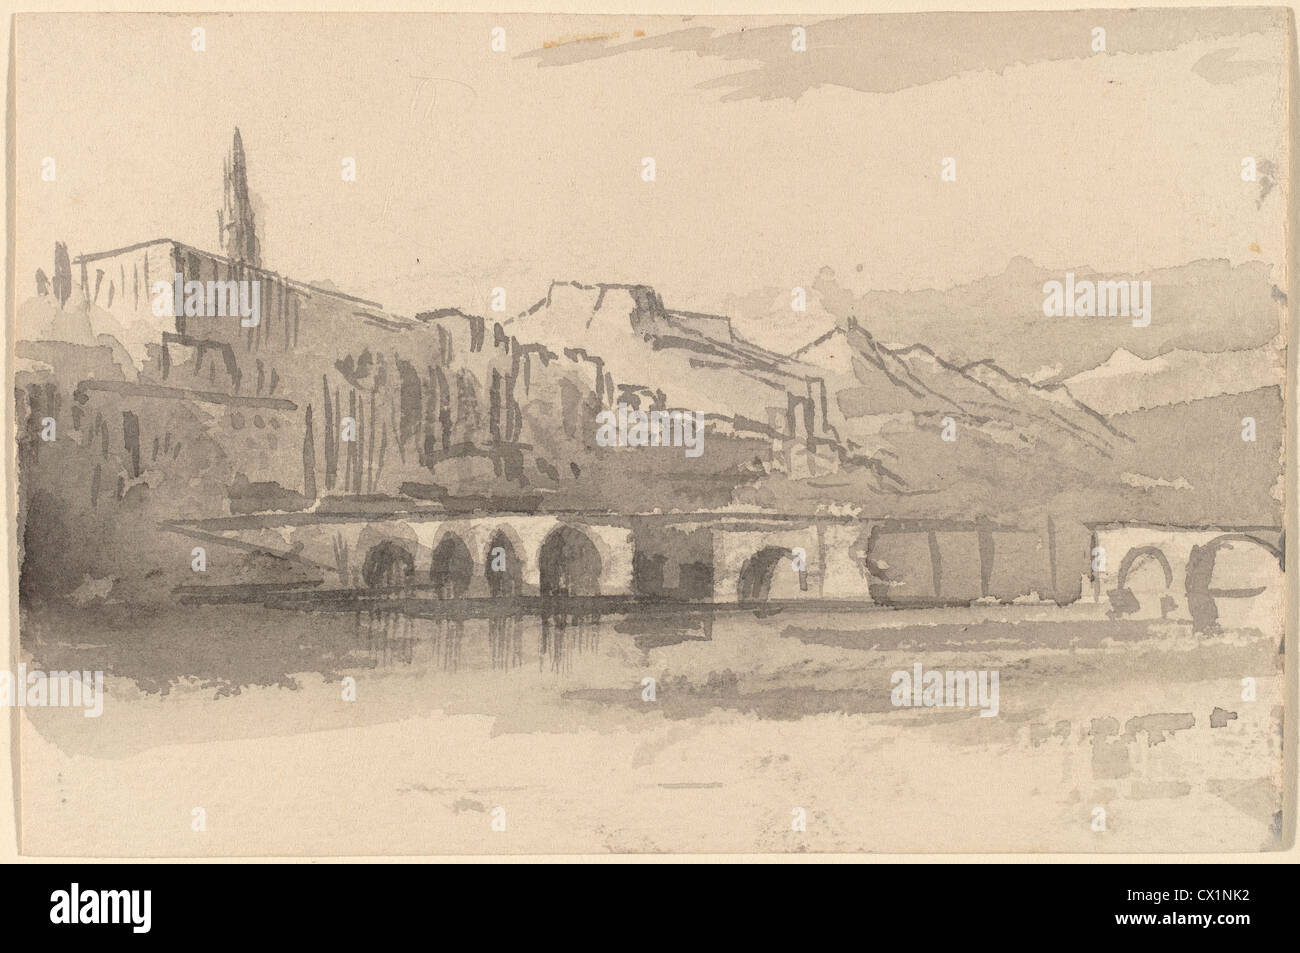 Edward Lear, Bridge with Mountains in the Distance (Ventimiglia), British, 1812 - 1888, 1884/1885, gray wash on wove paper Stock Photo